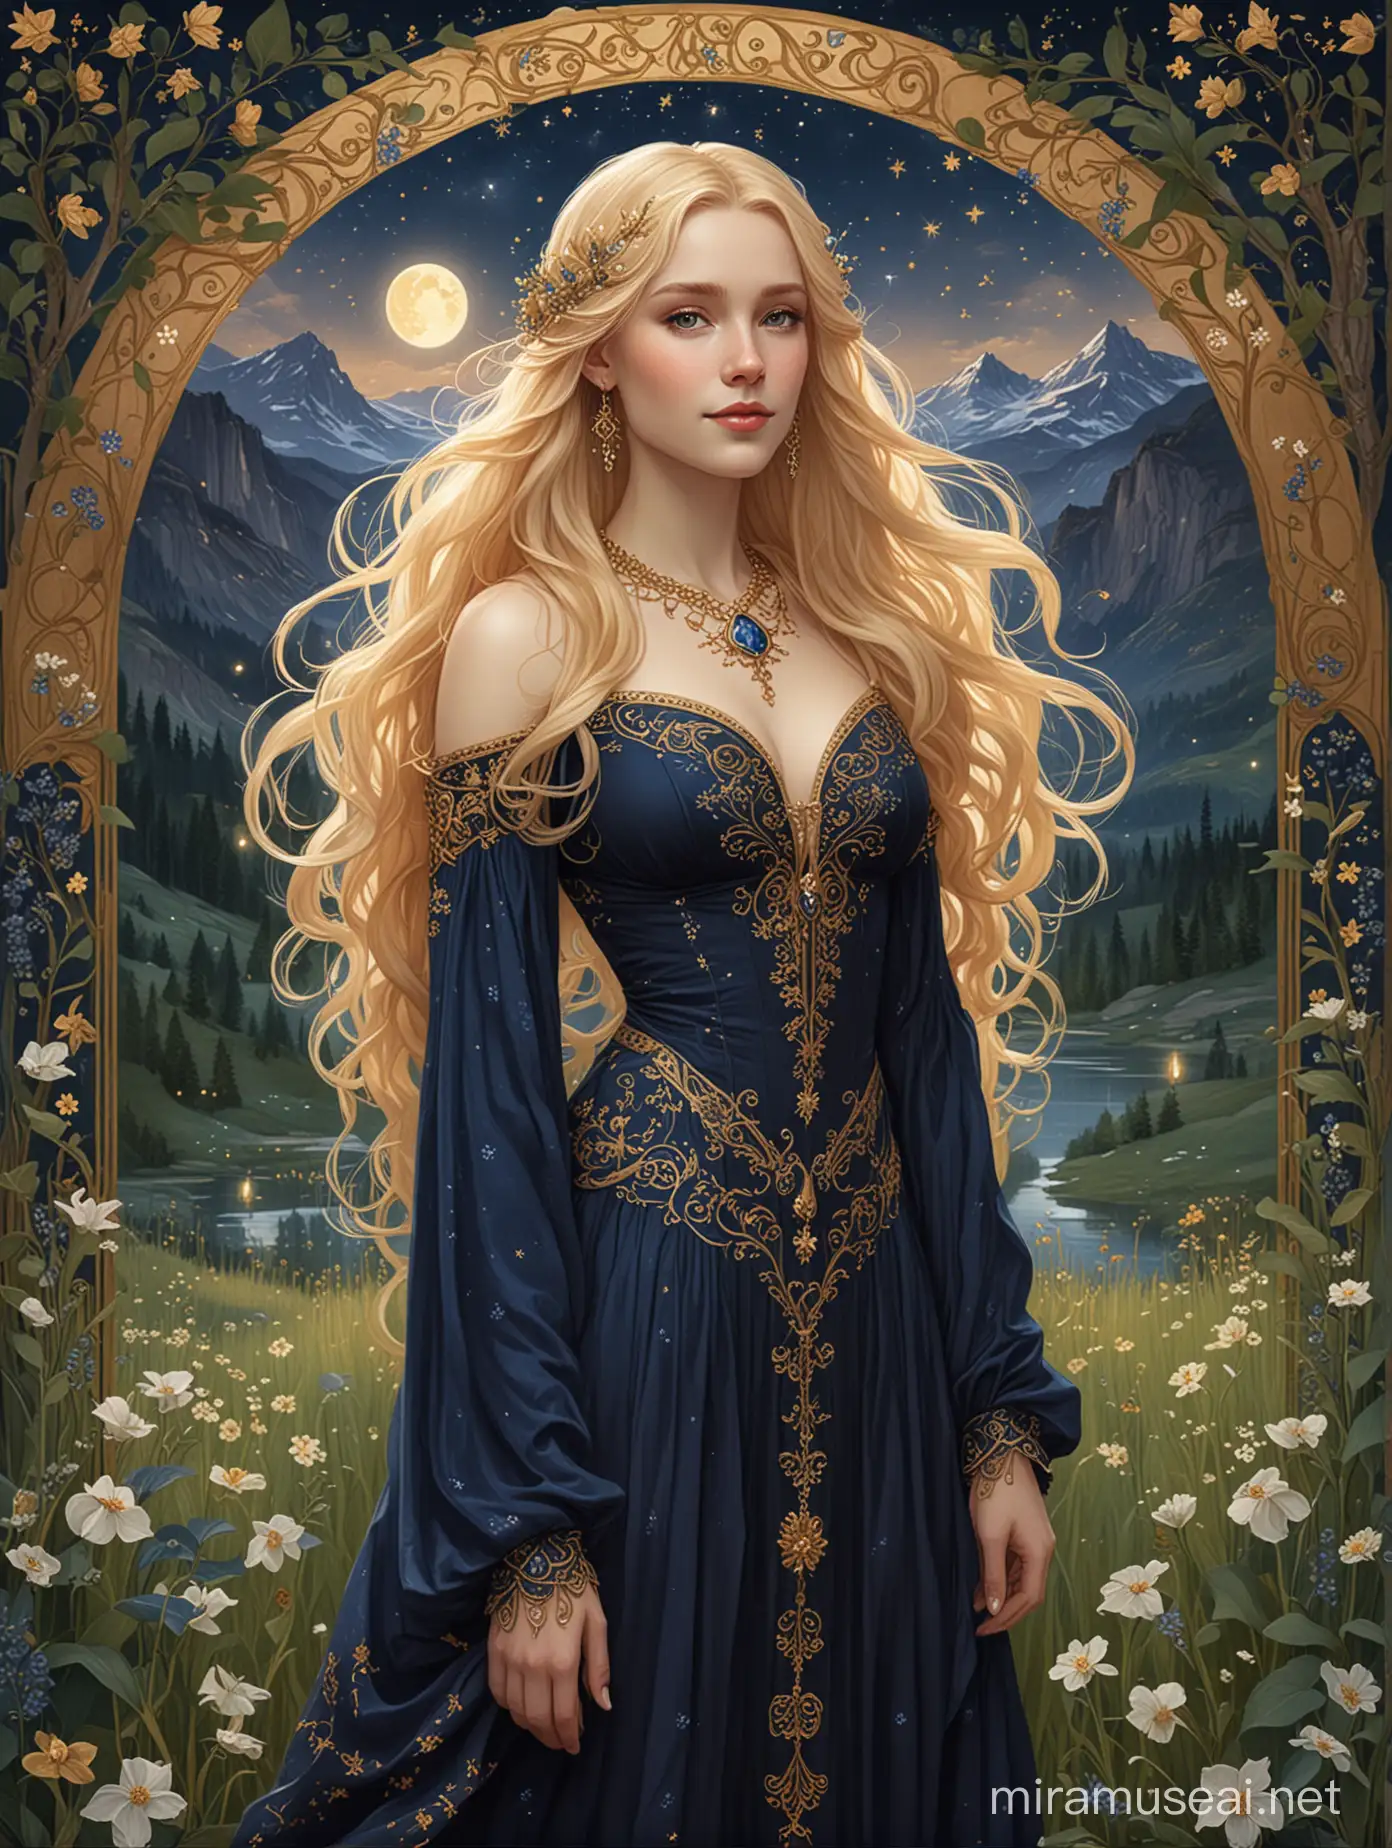 Enchanting Elf with Flowing Blonde Hair and Ornate Jewelry in Moonlit Birch Grove